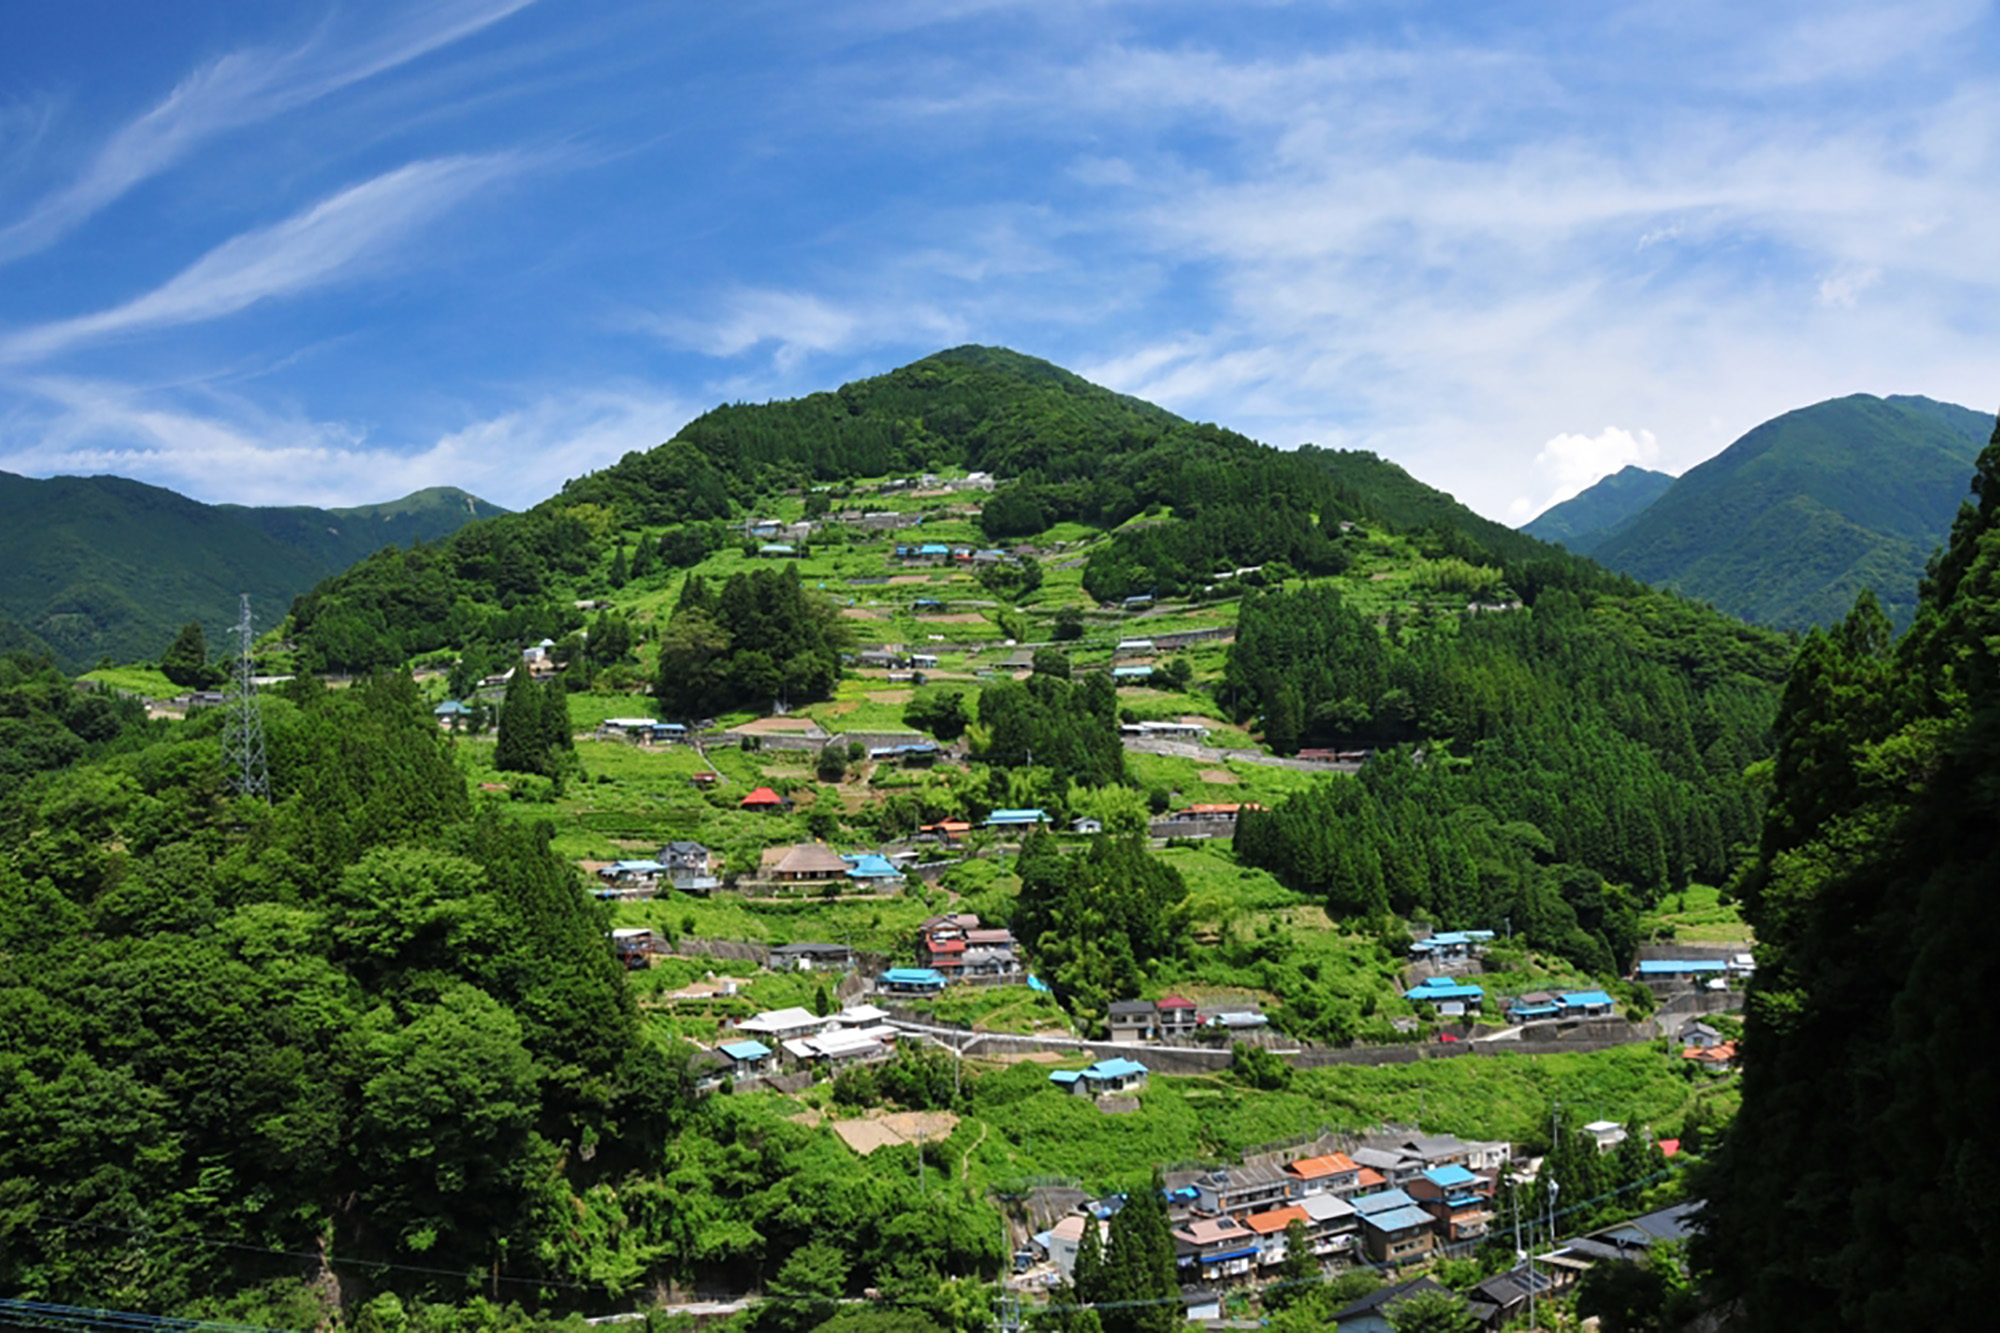 A view of the Nishi-Awa site, in the mountainous Tokushima region of Japan.